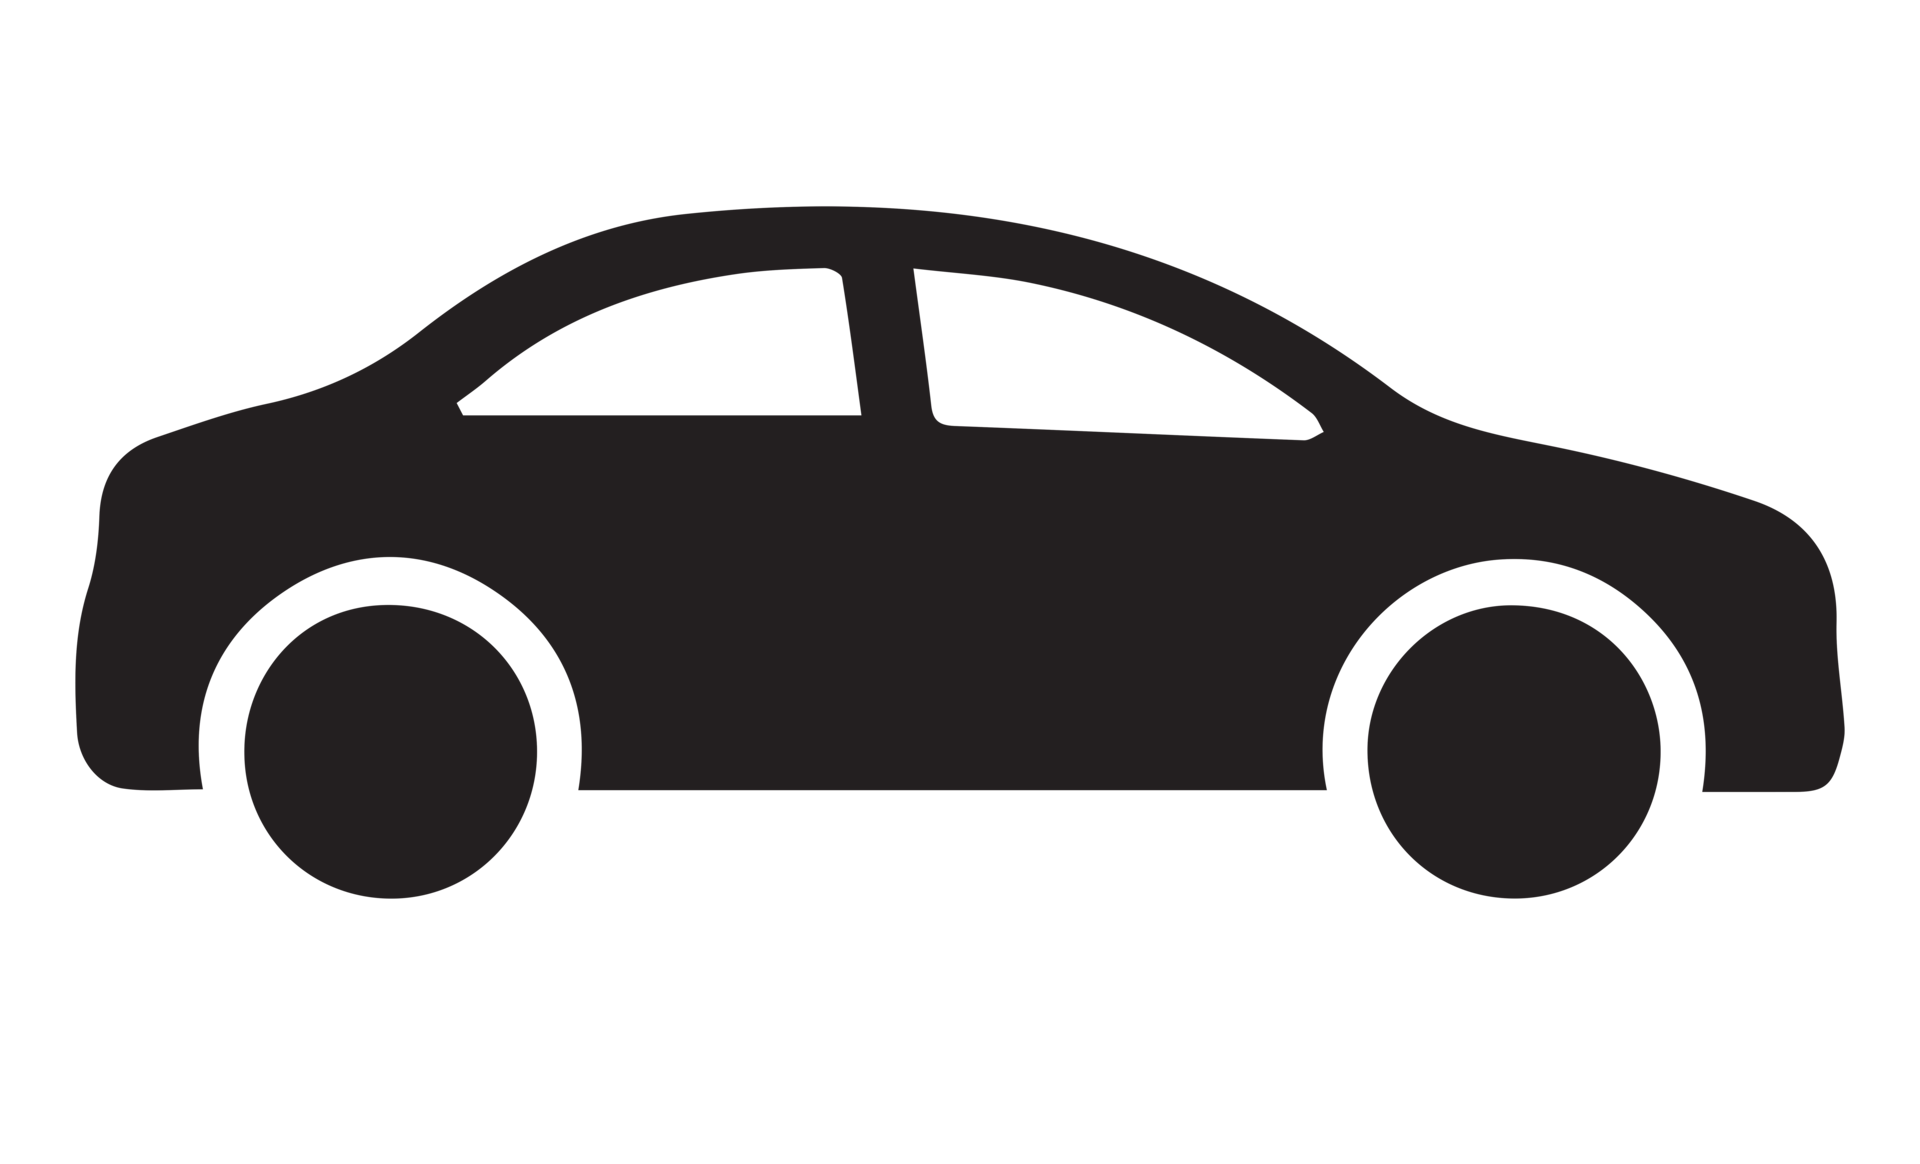 Car monochrome icon on transparent background. 19879187 PNG